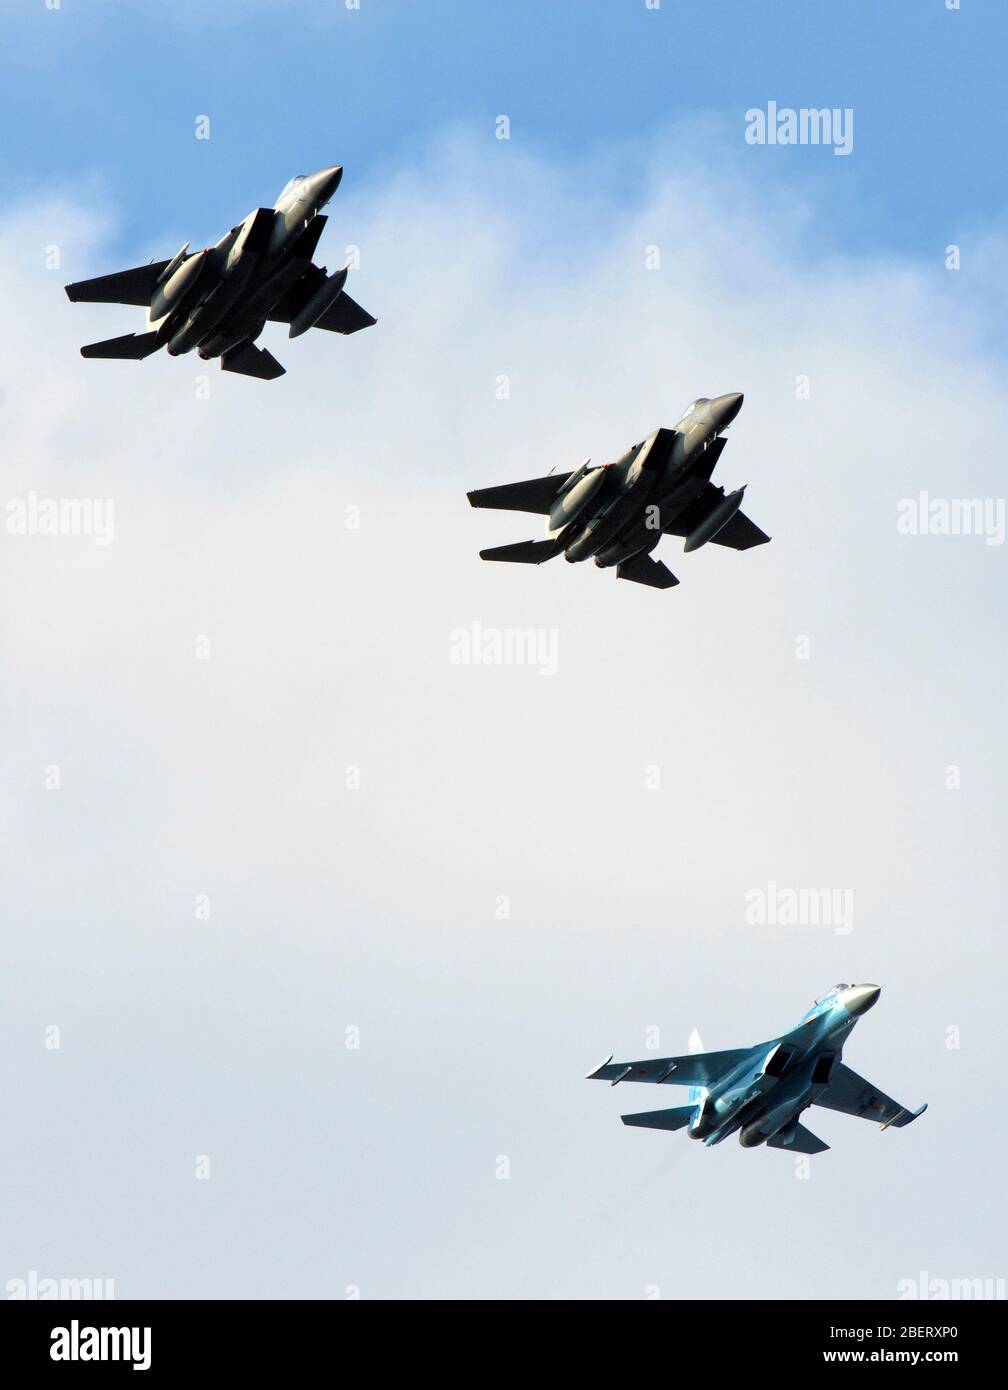 Ukrainian Air Force Su-27 and United States F-15 aircraft in flight. Stock Photo